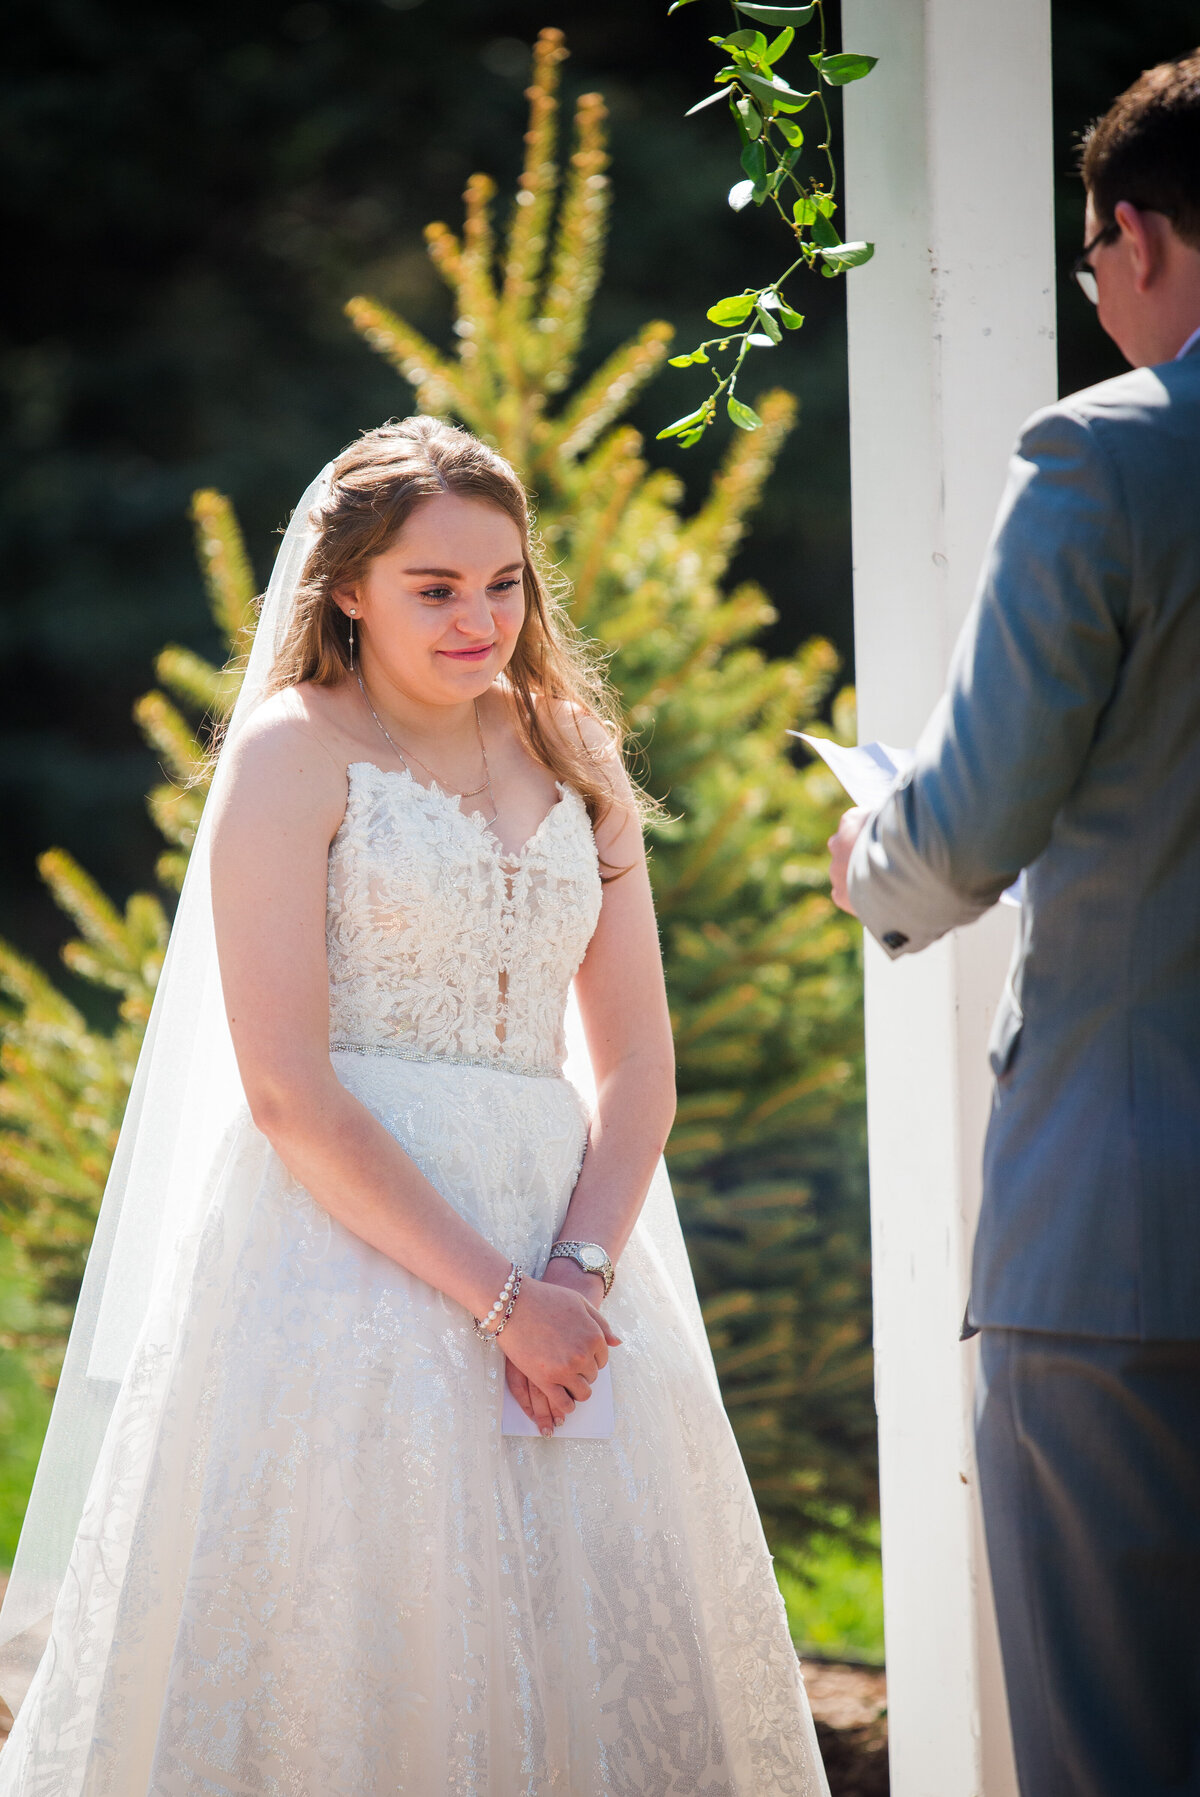 A bride looks emotionally as her groom reads his vows to her during their outdoor wedding ceremony.